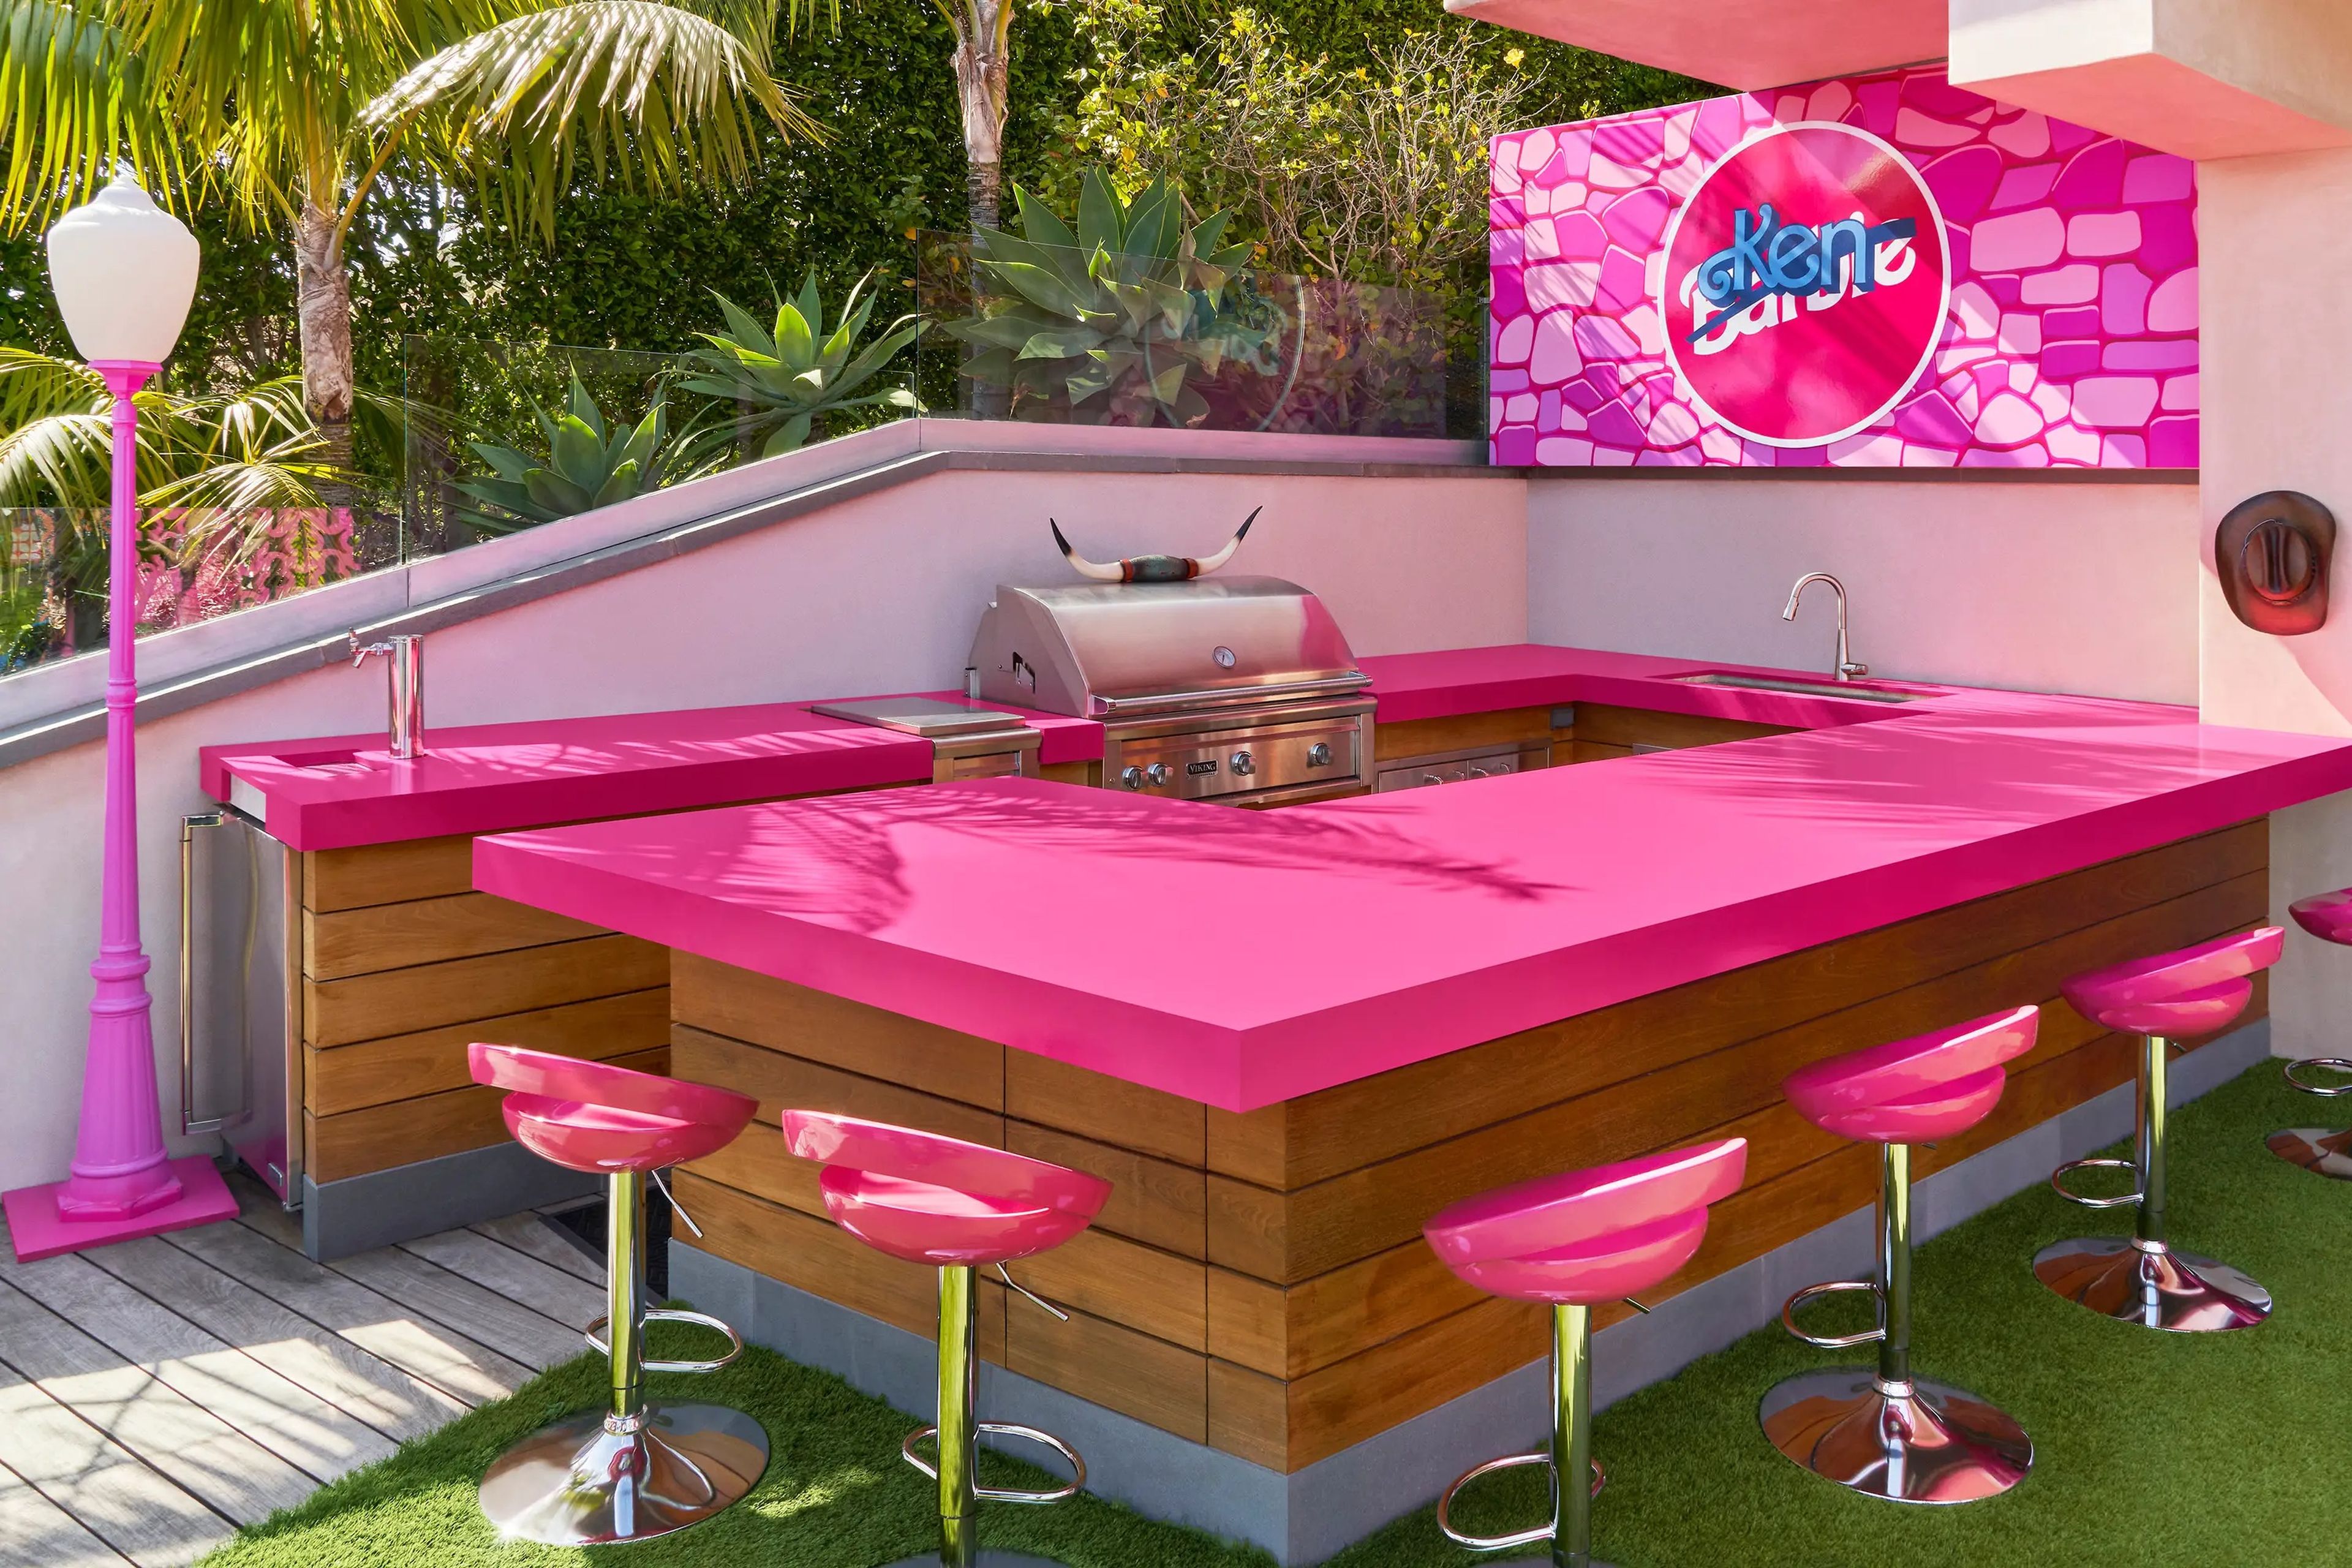 The outdoor grill comes with pink tabletops and seats.